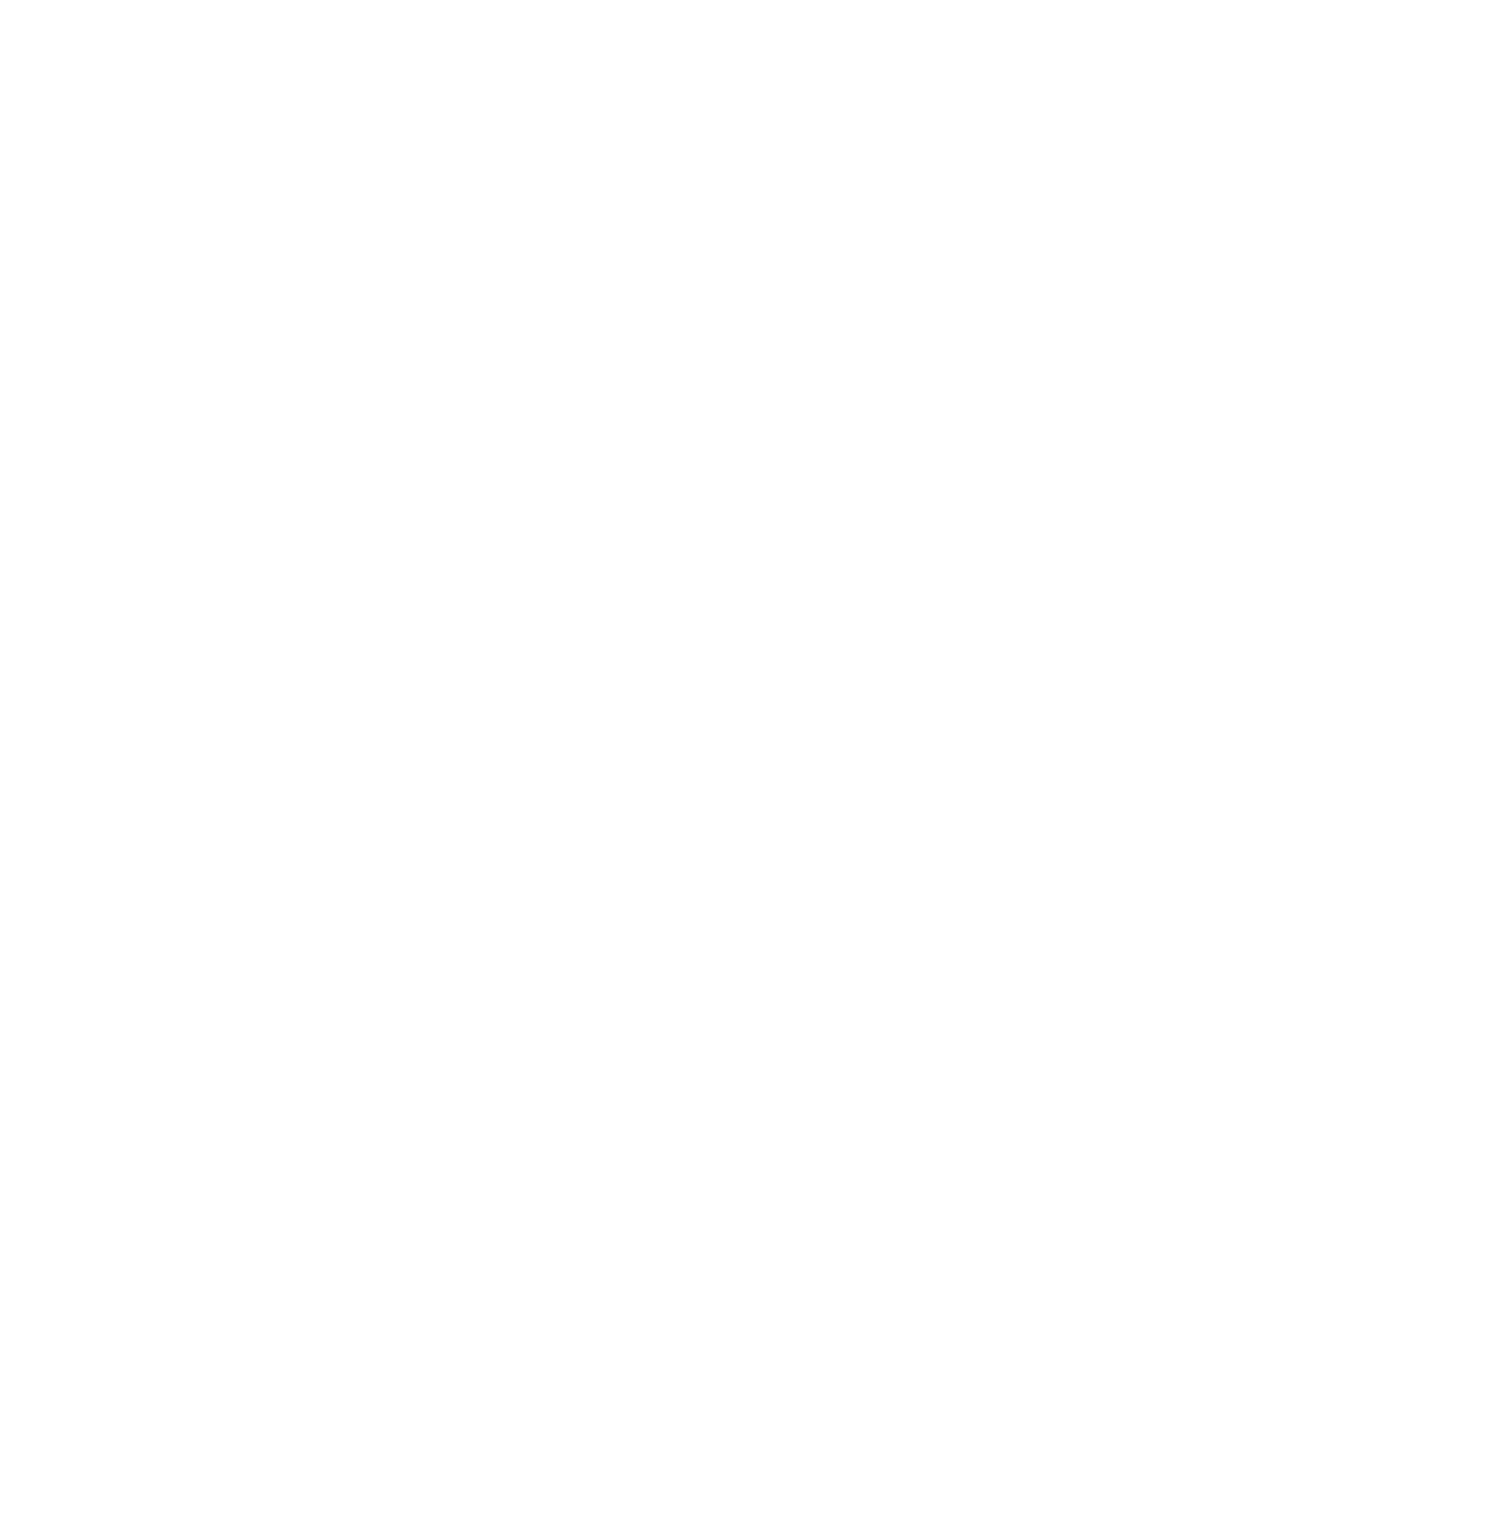 Expert Cleaning Company &mdash; Serving Boston and North Shore of Massachusetts